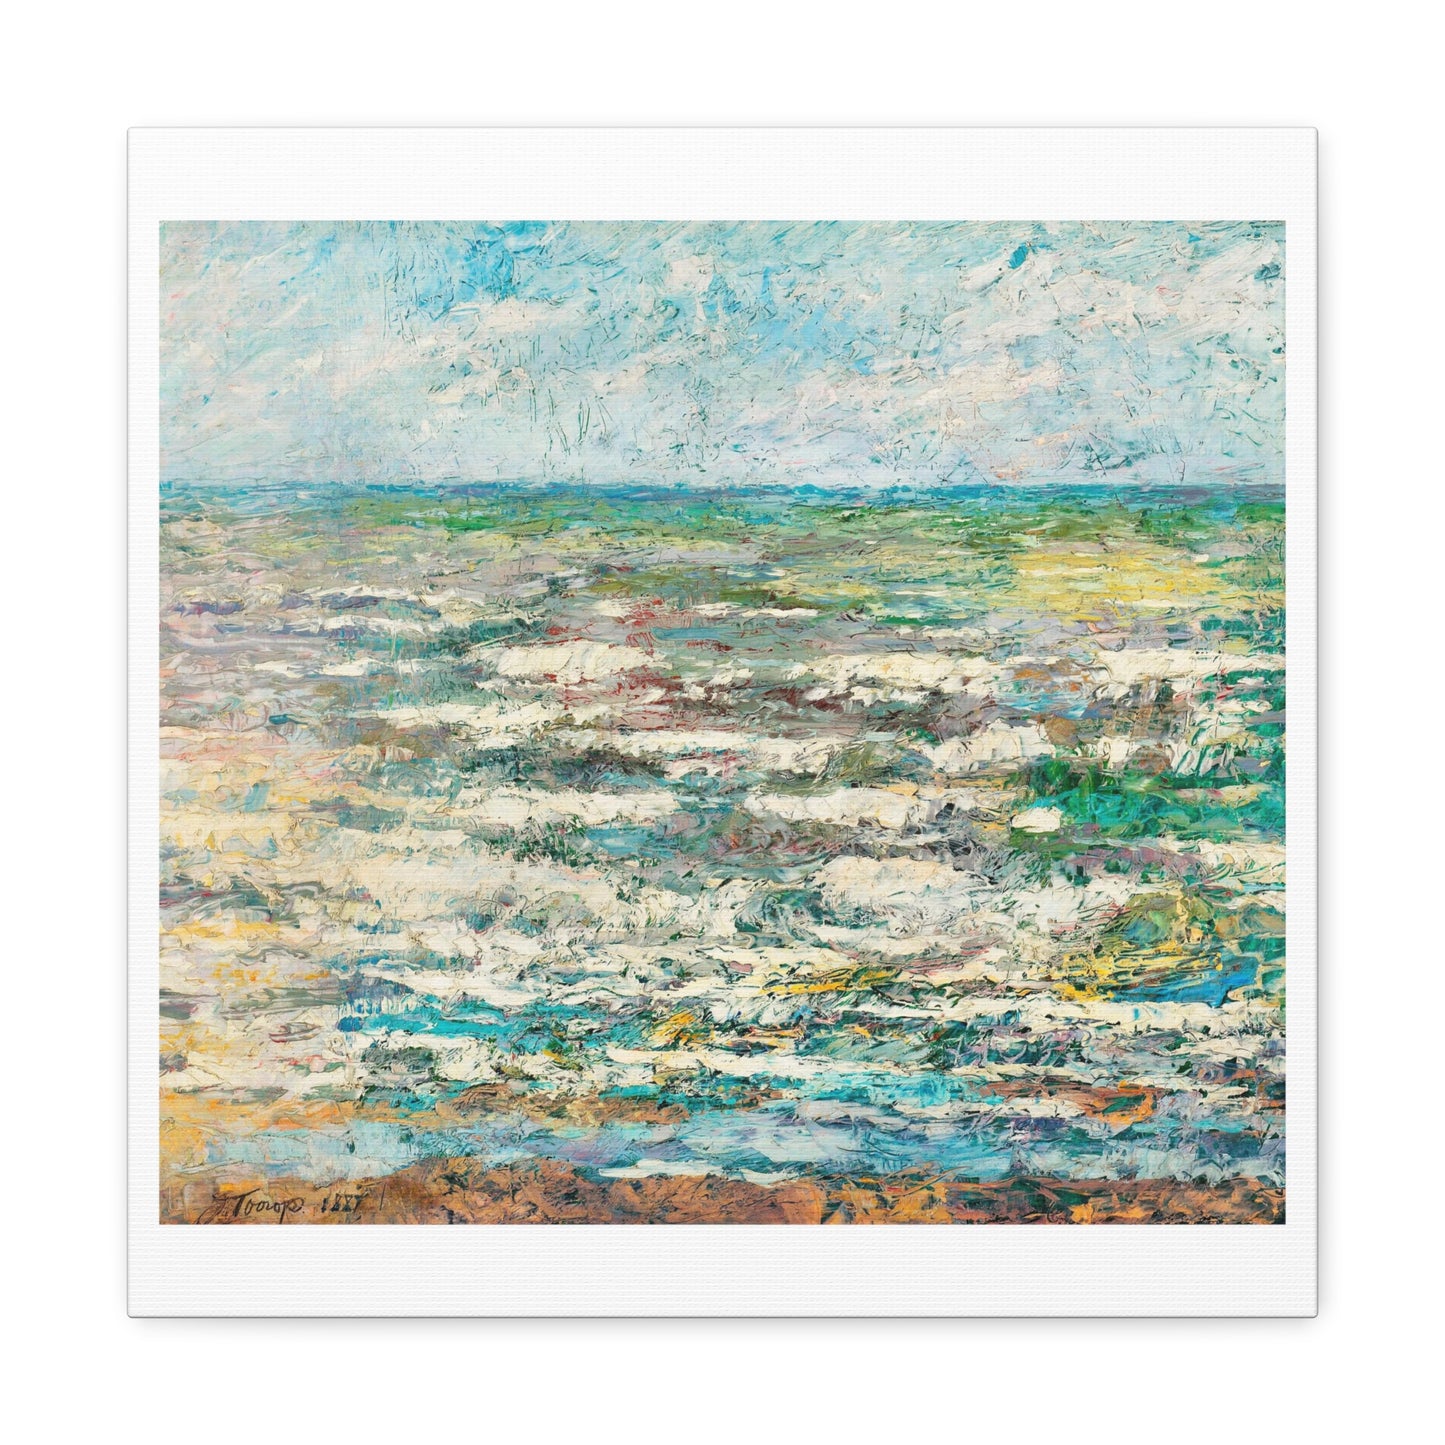 The Sea (1887) by Jan Toorop, from the Original, Print on Canvas